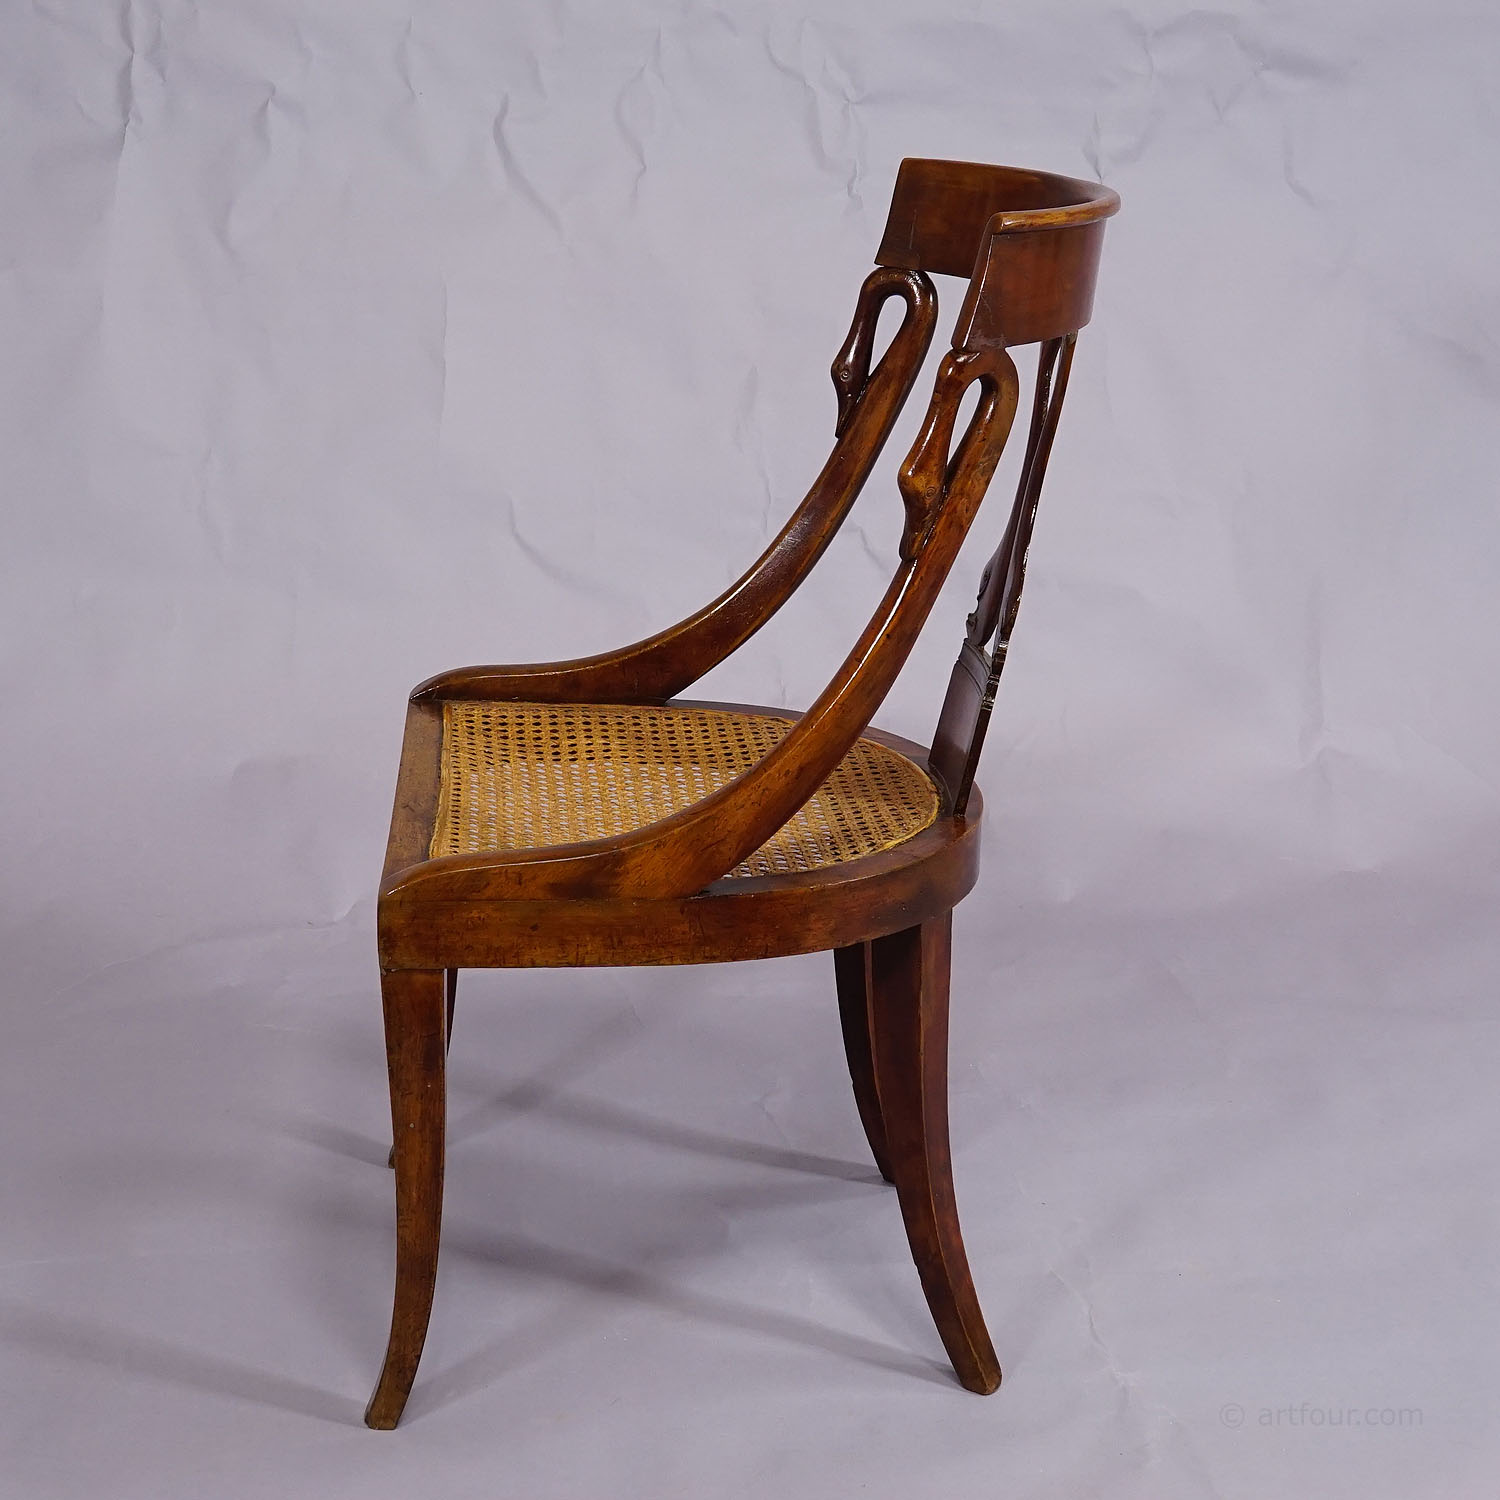 Pair of Hand-Crafted Biedermeier Chairs with Swan and Dolphin Backrests